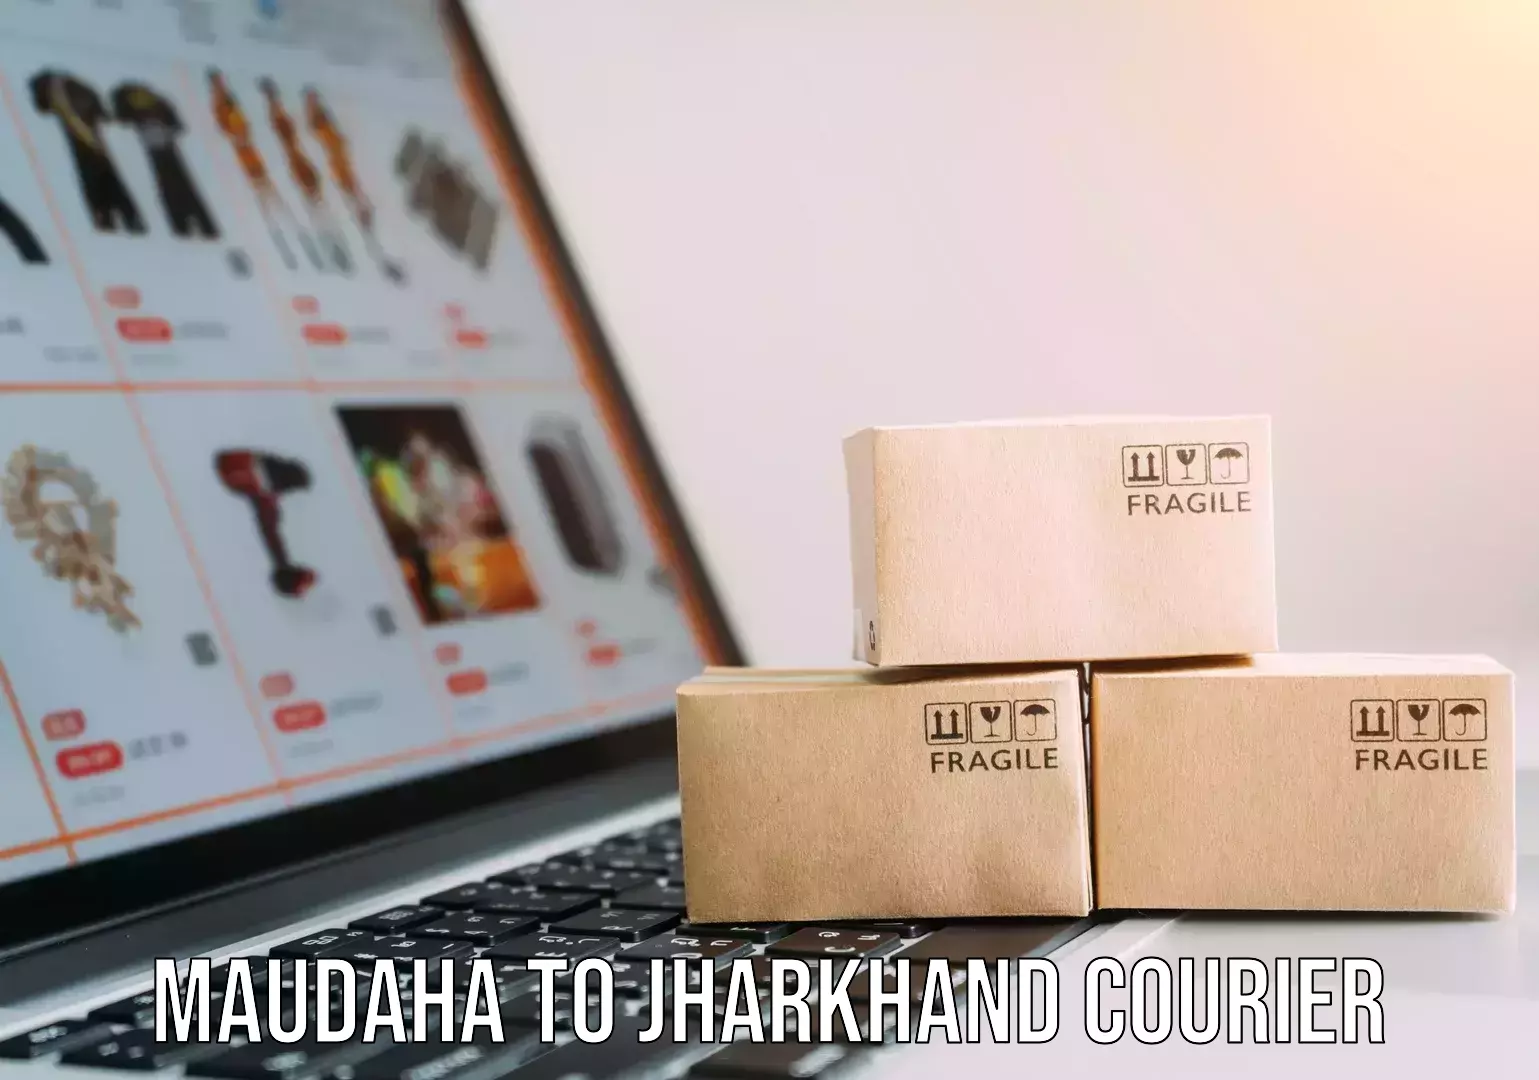 Trusted relocation experts Maudaha to Jharkhand